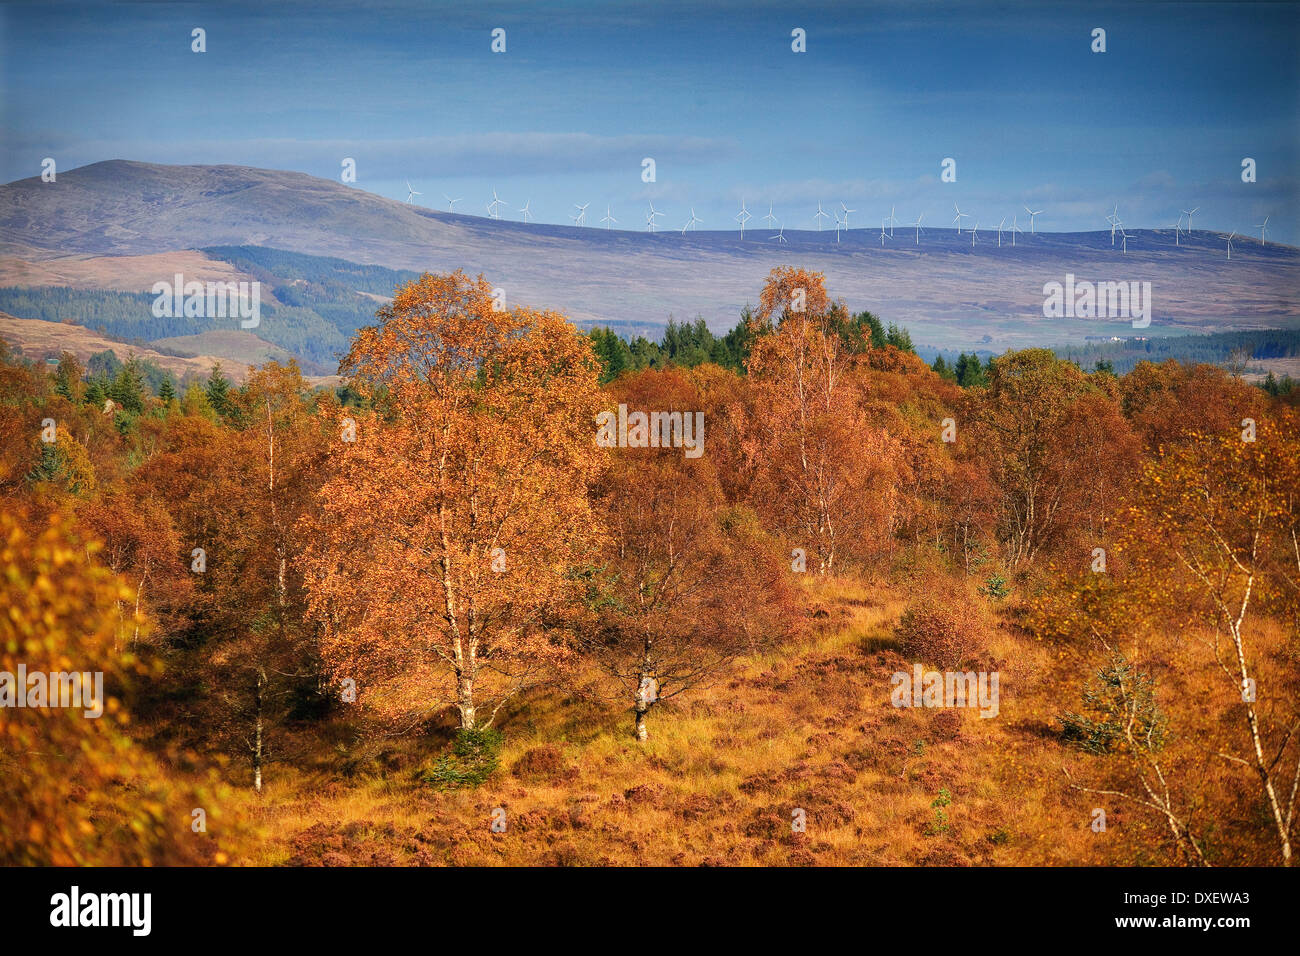 Autumn view from the dukes pass in the trossachs region with distant wind turbines.central scotland. Stock Photo